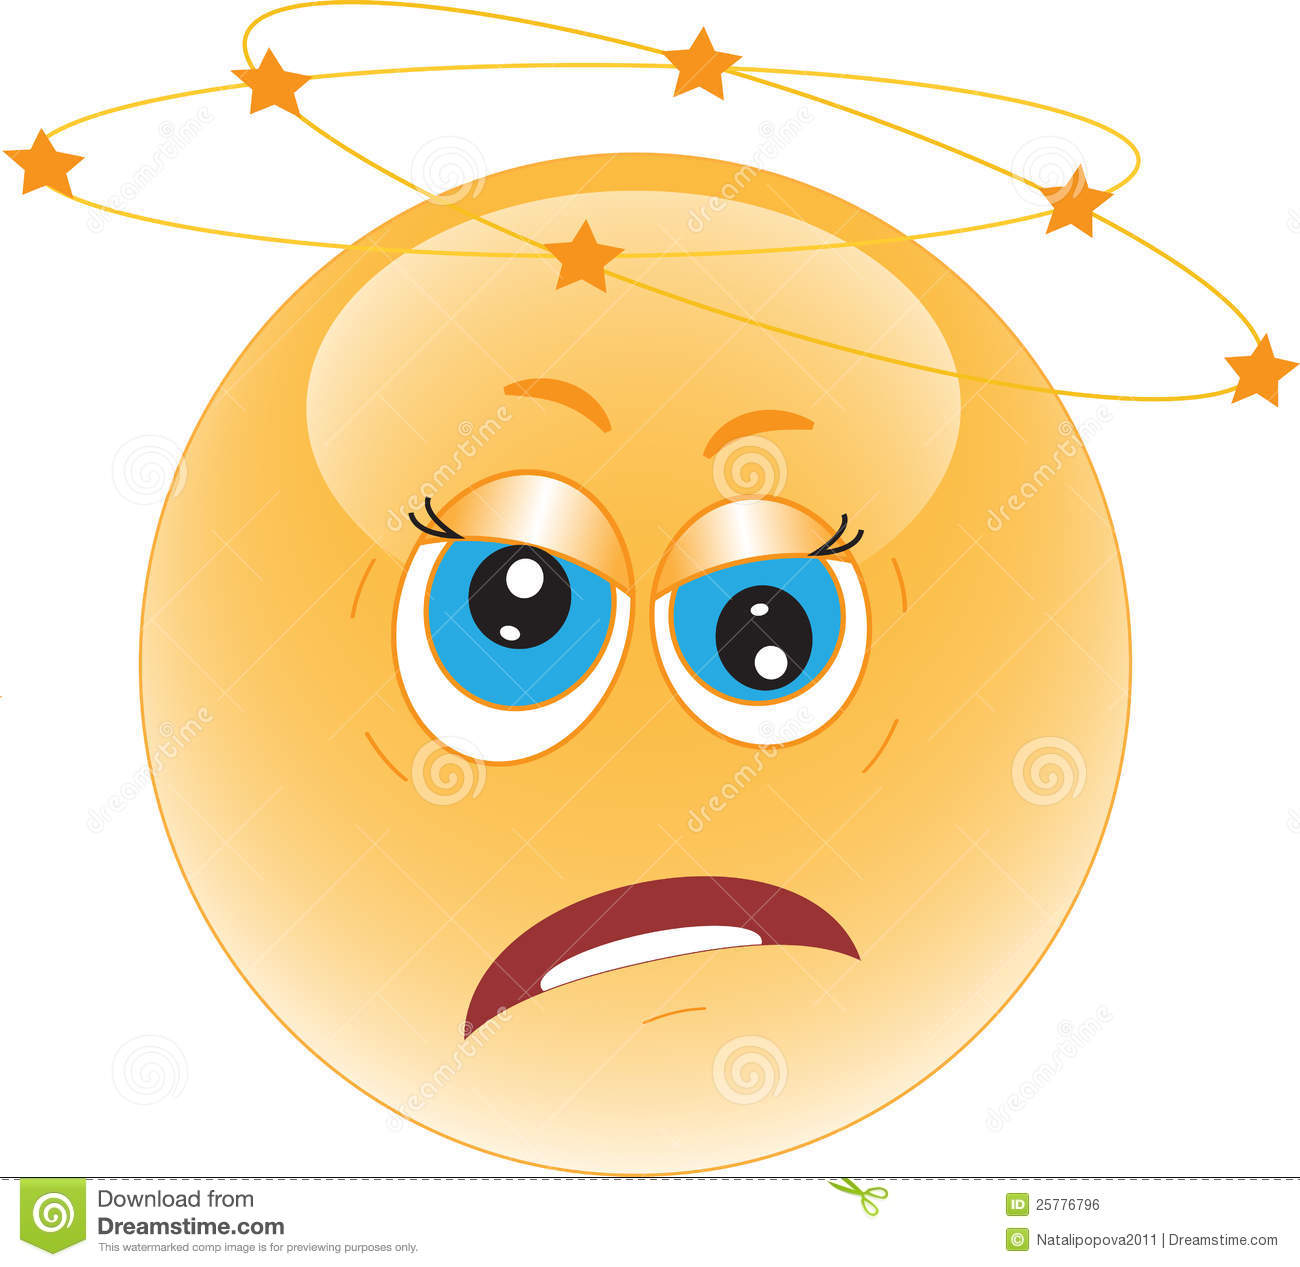 Royalty Free Stock Image  Frustrated Smiley  Icon  Emotions